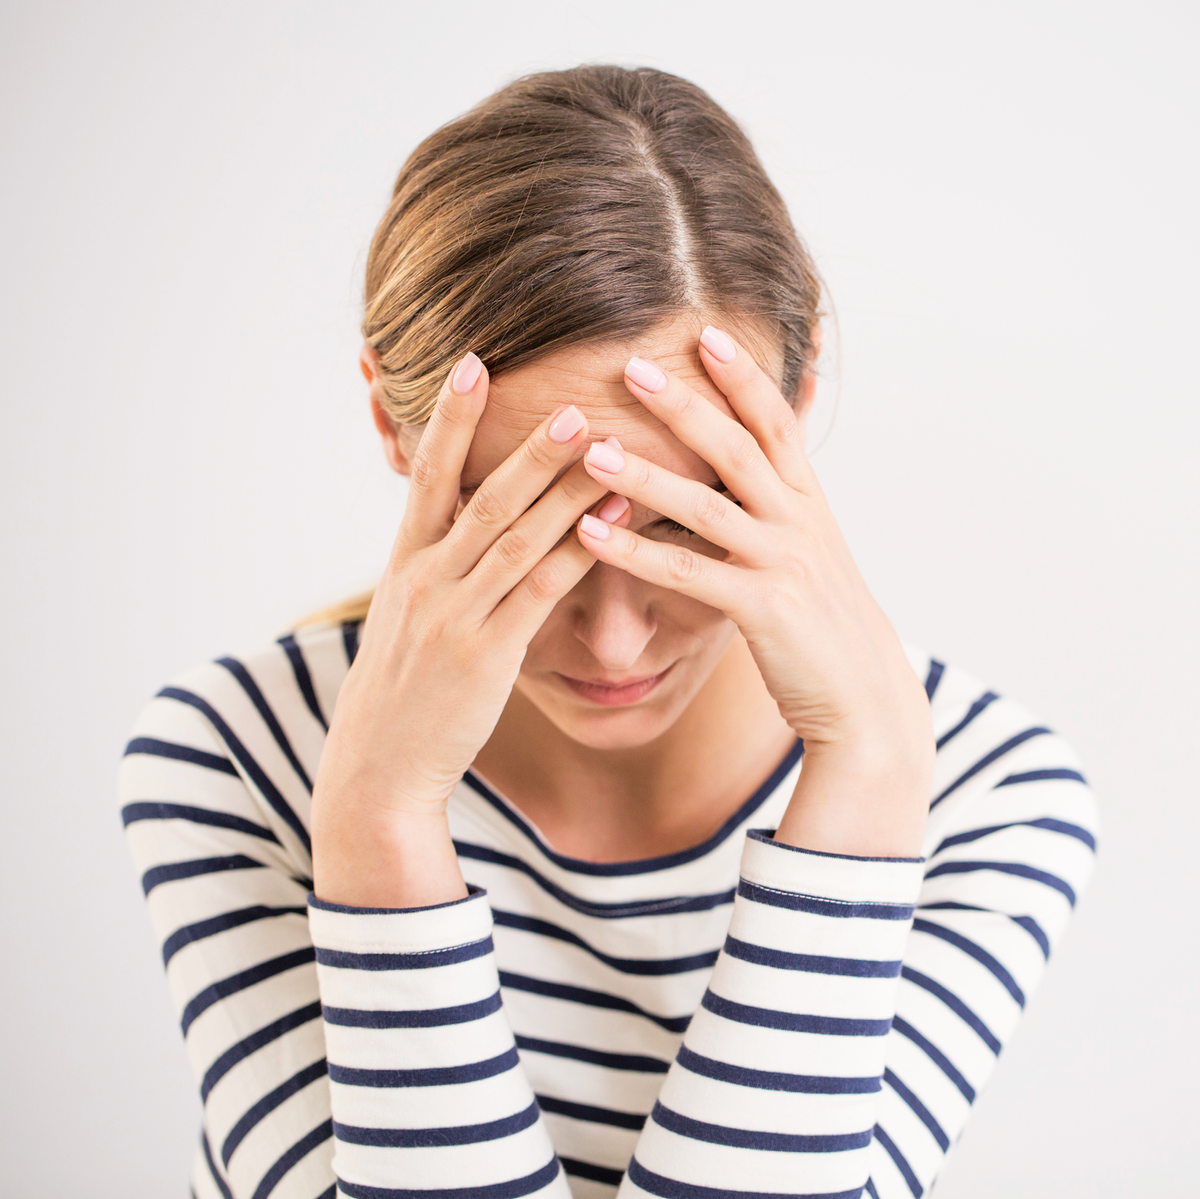 woman holding her head due to tension headache